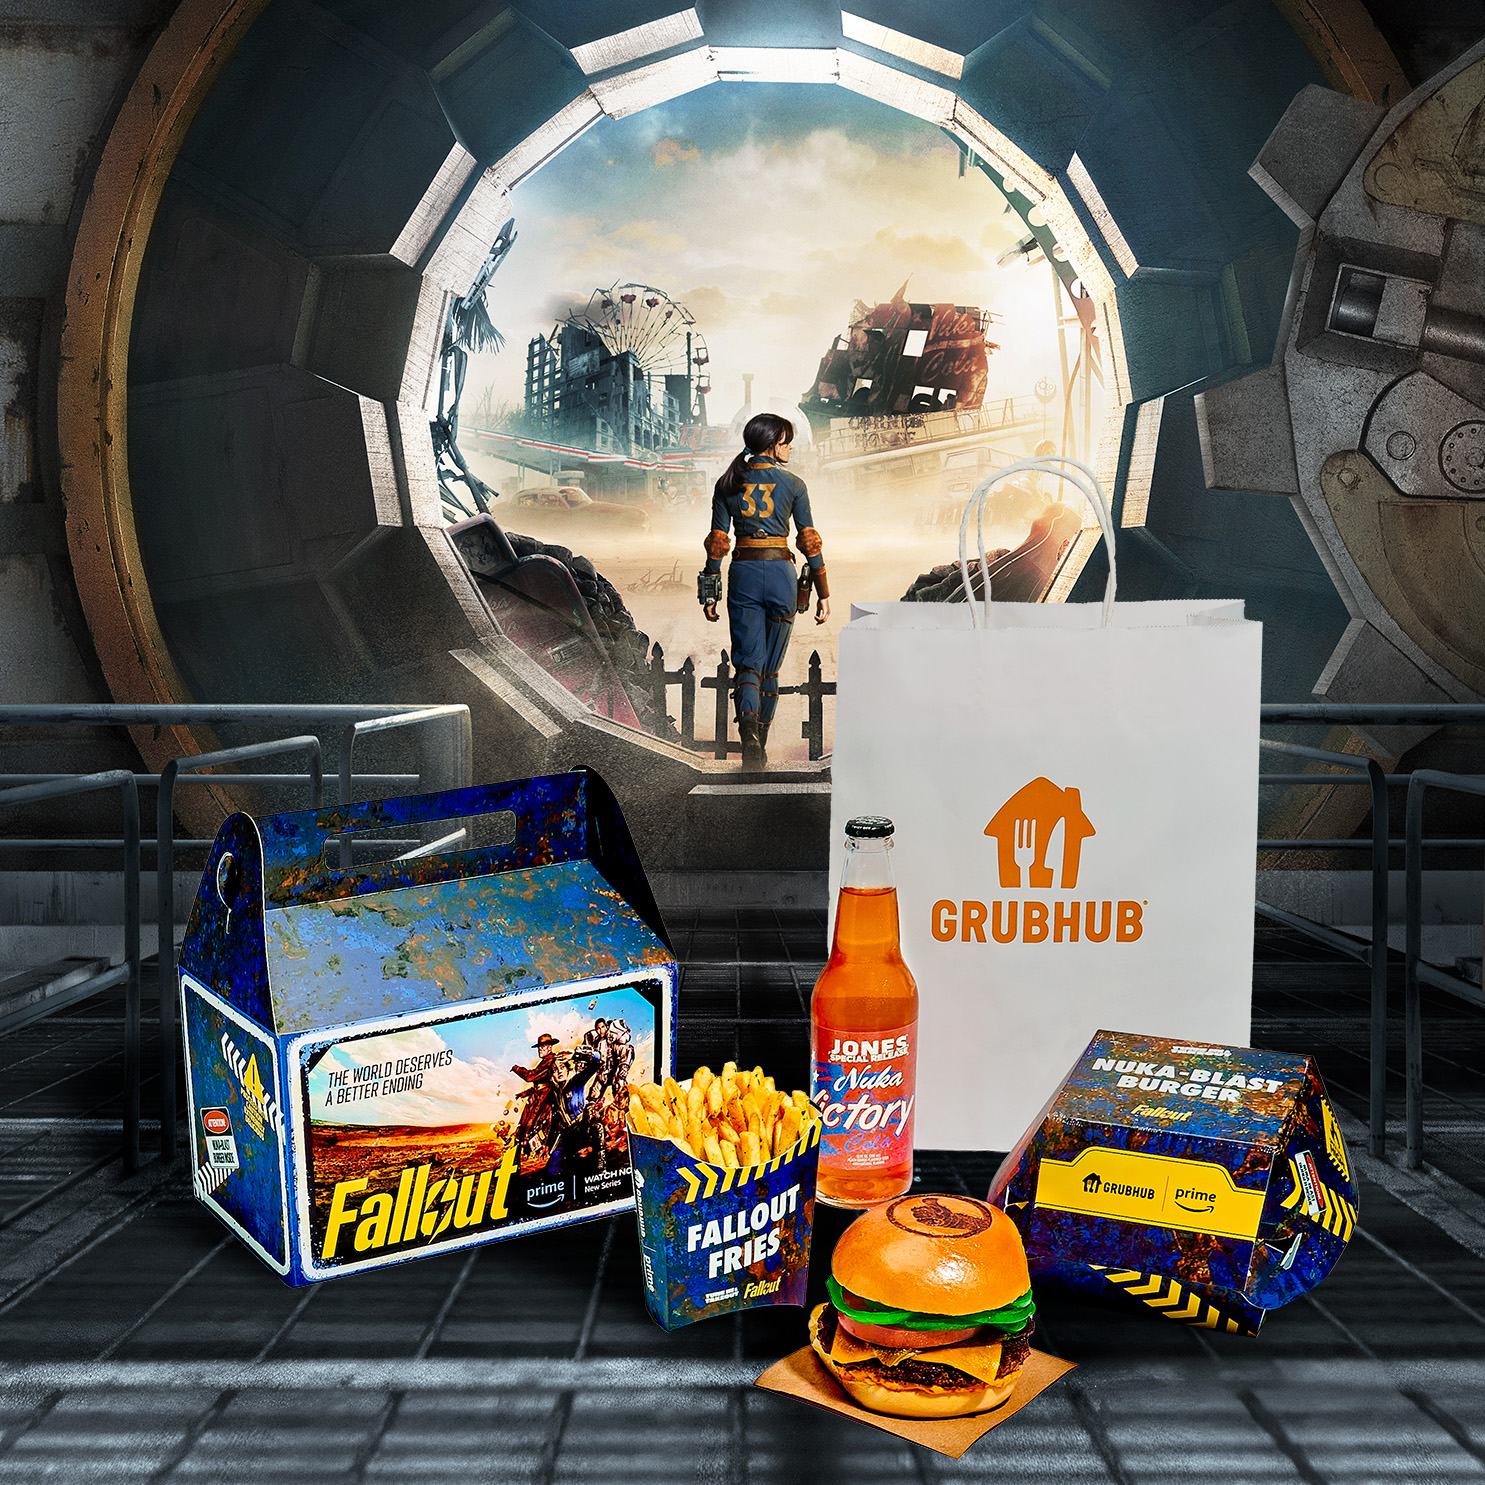 Grubhub Debuts the Nuka-Blast Burger Meal to Celebrate the Series Premiere of Fallout on Prime Video